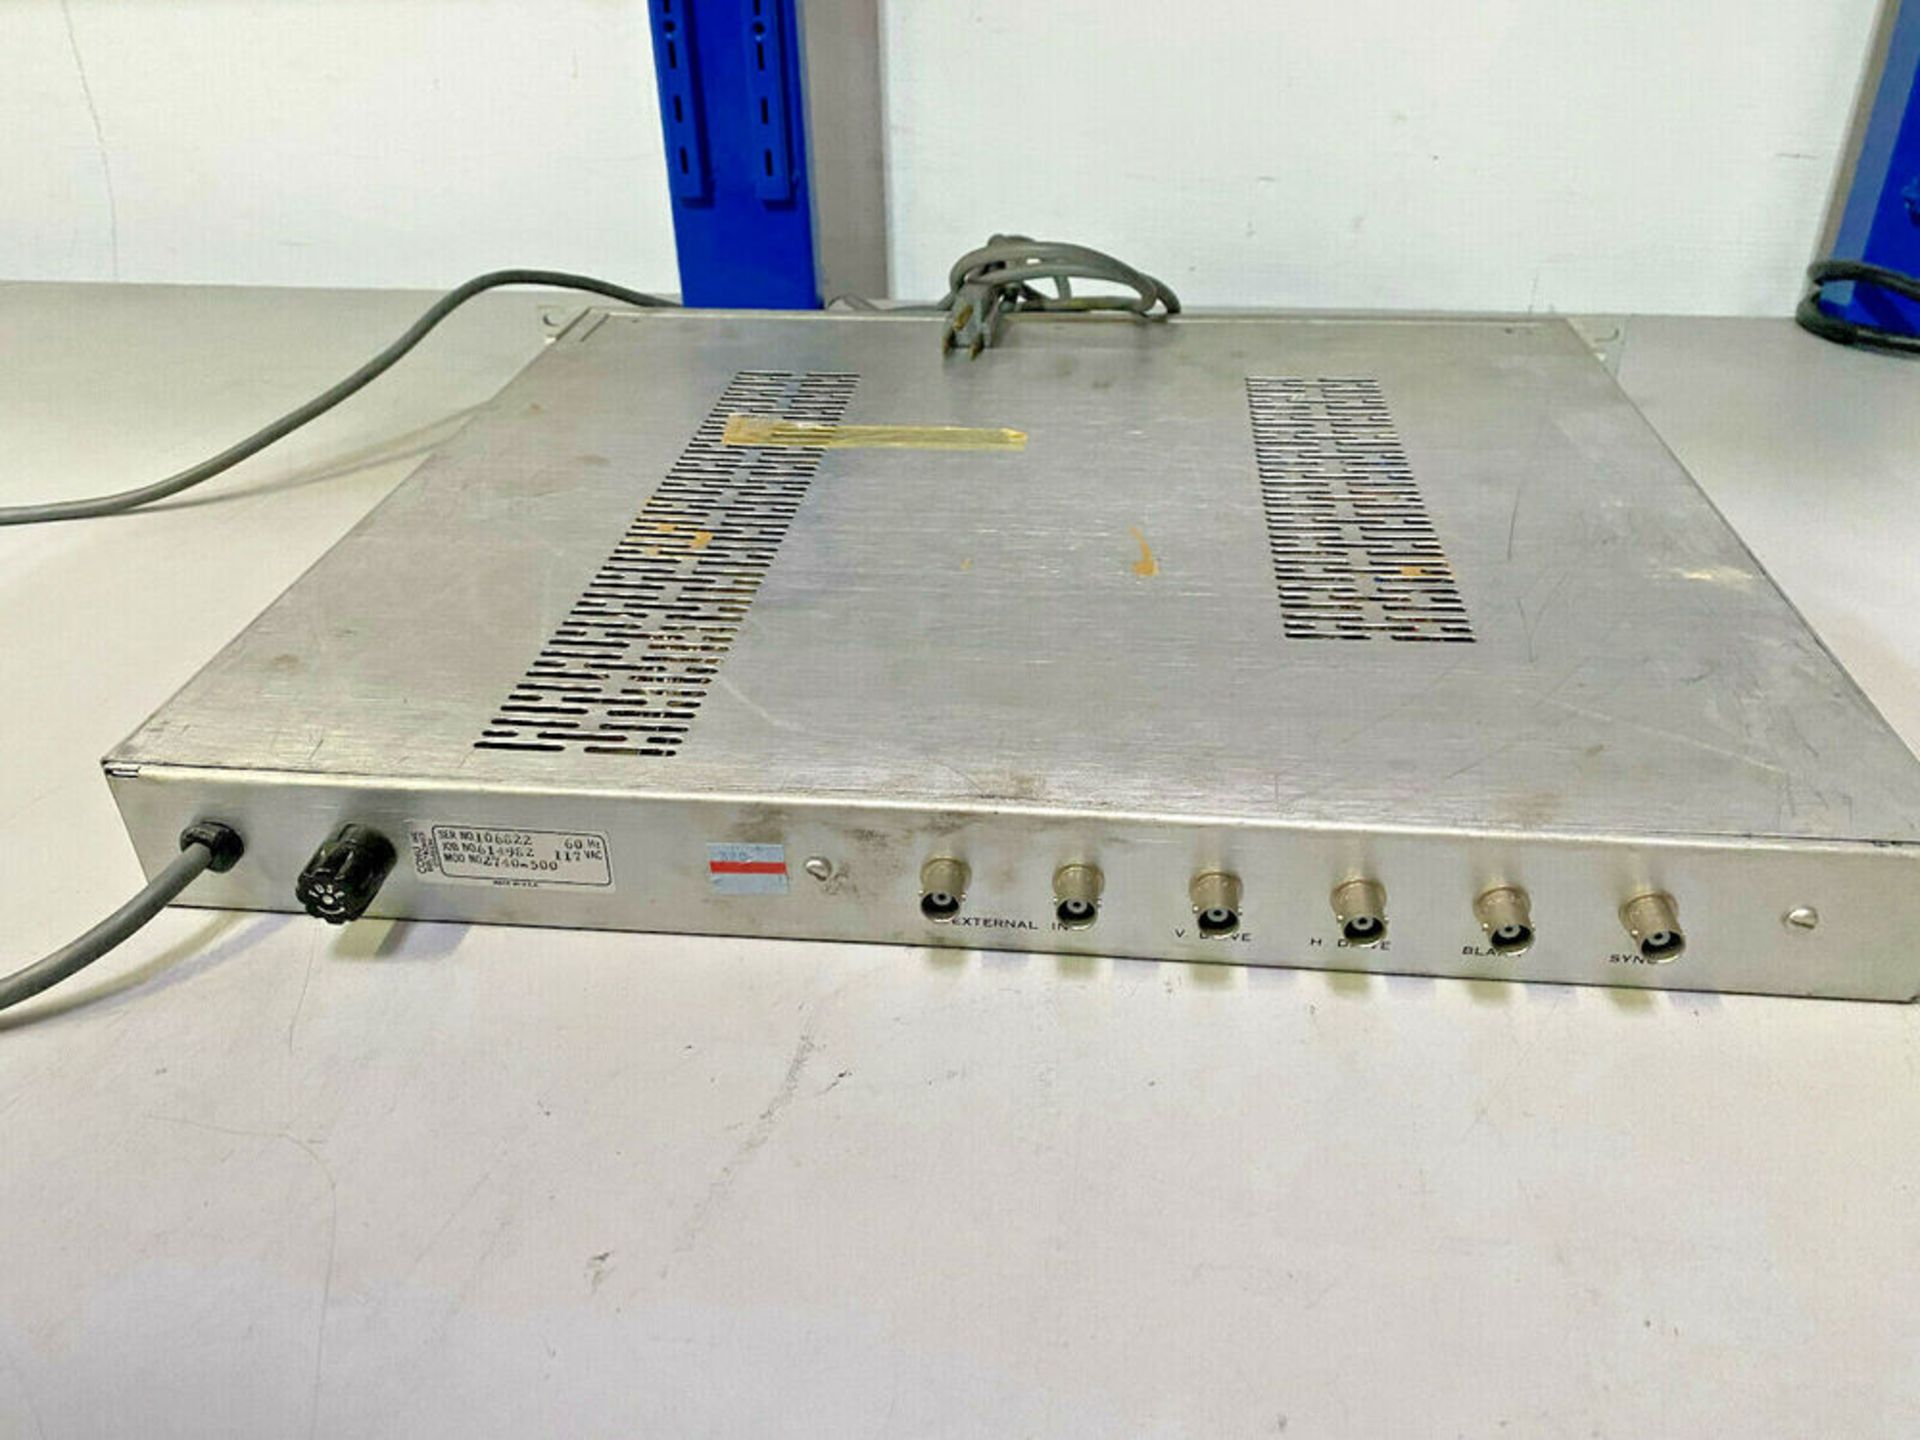 Hewlett-Packard HP HP3235 Switch/Test Unit - Untested AS-IS - Image 2 of 3